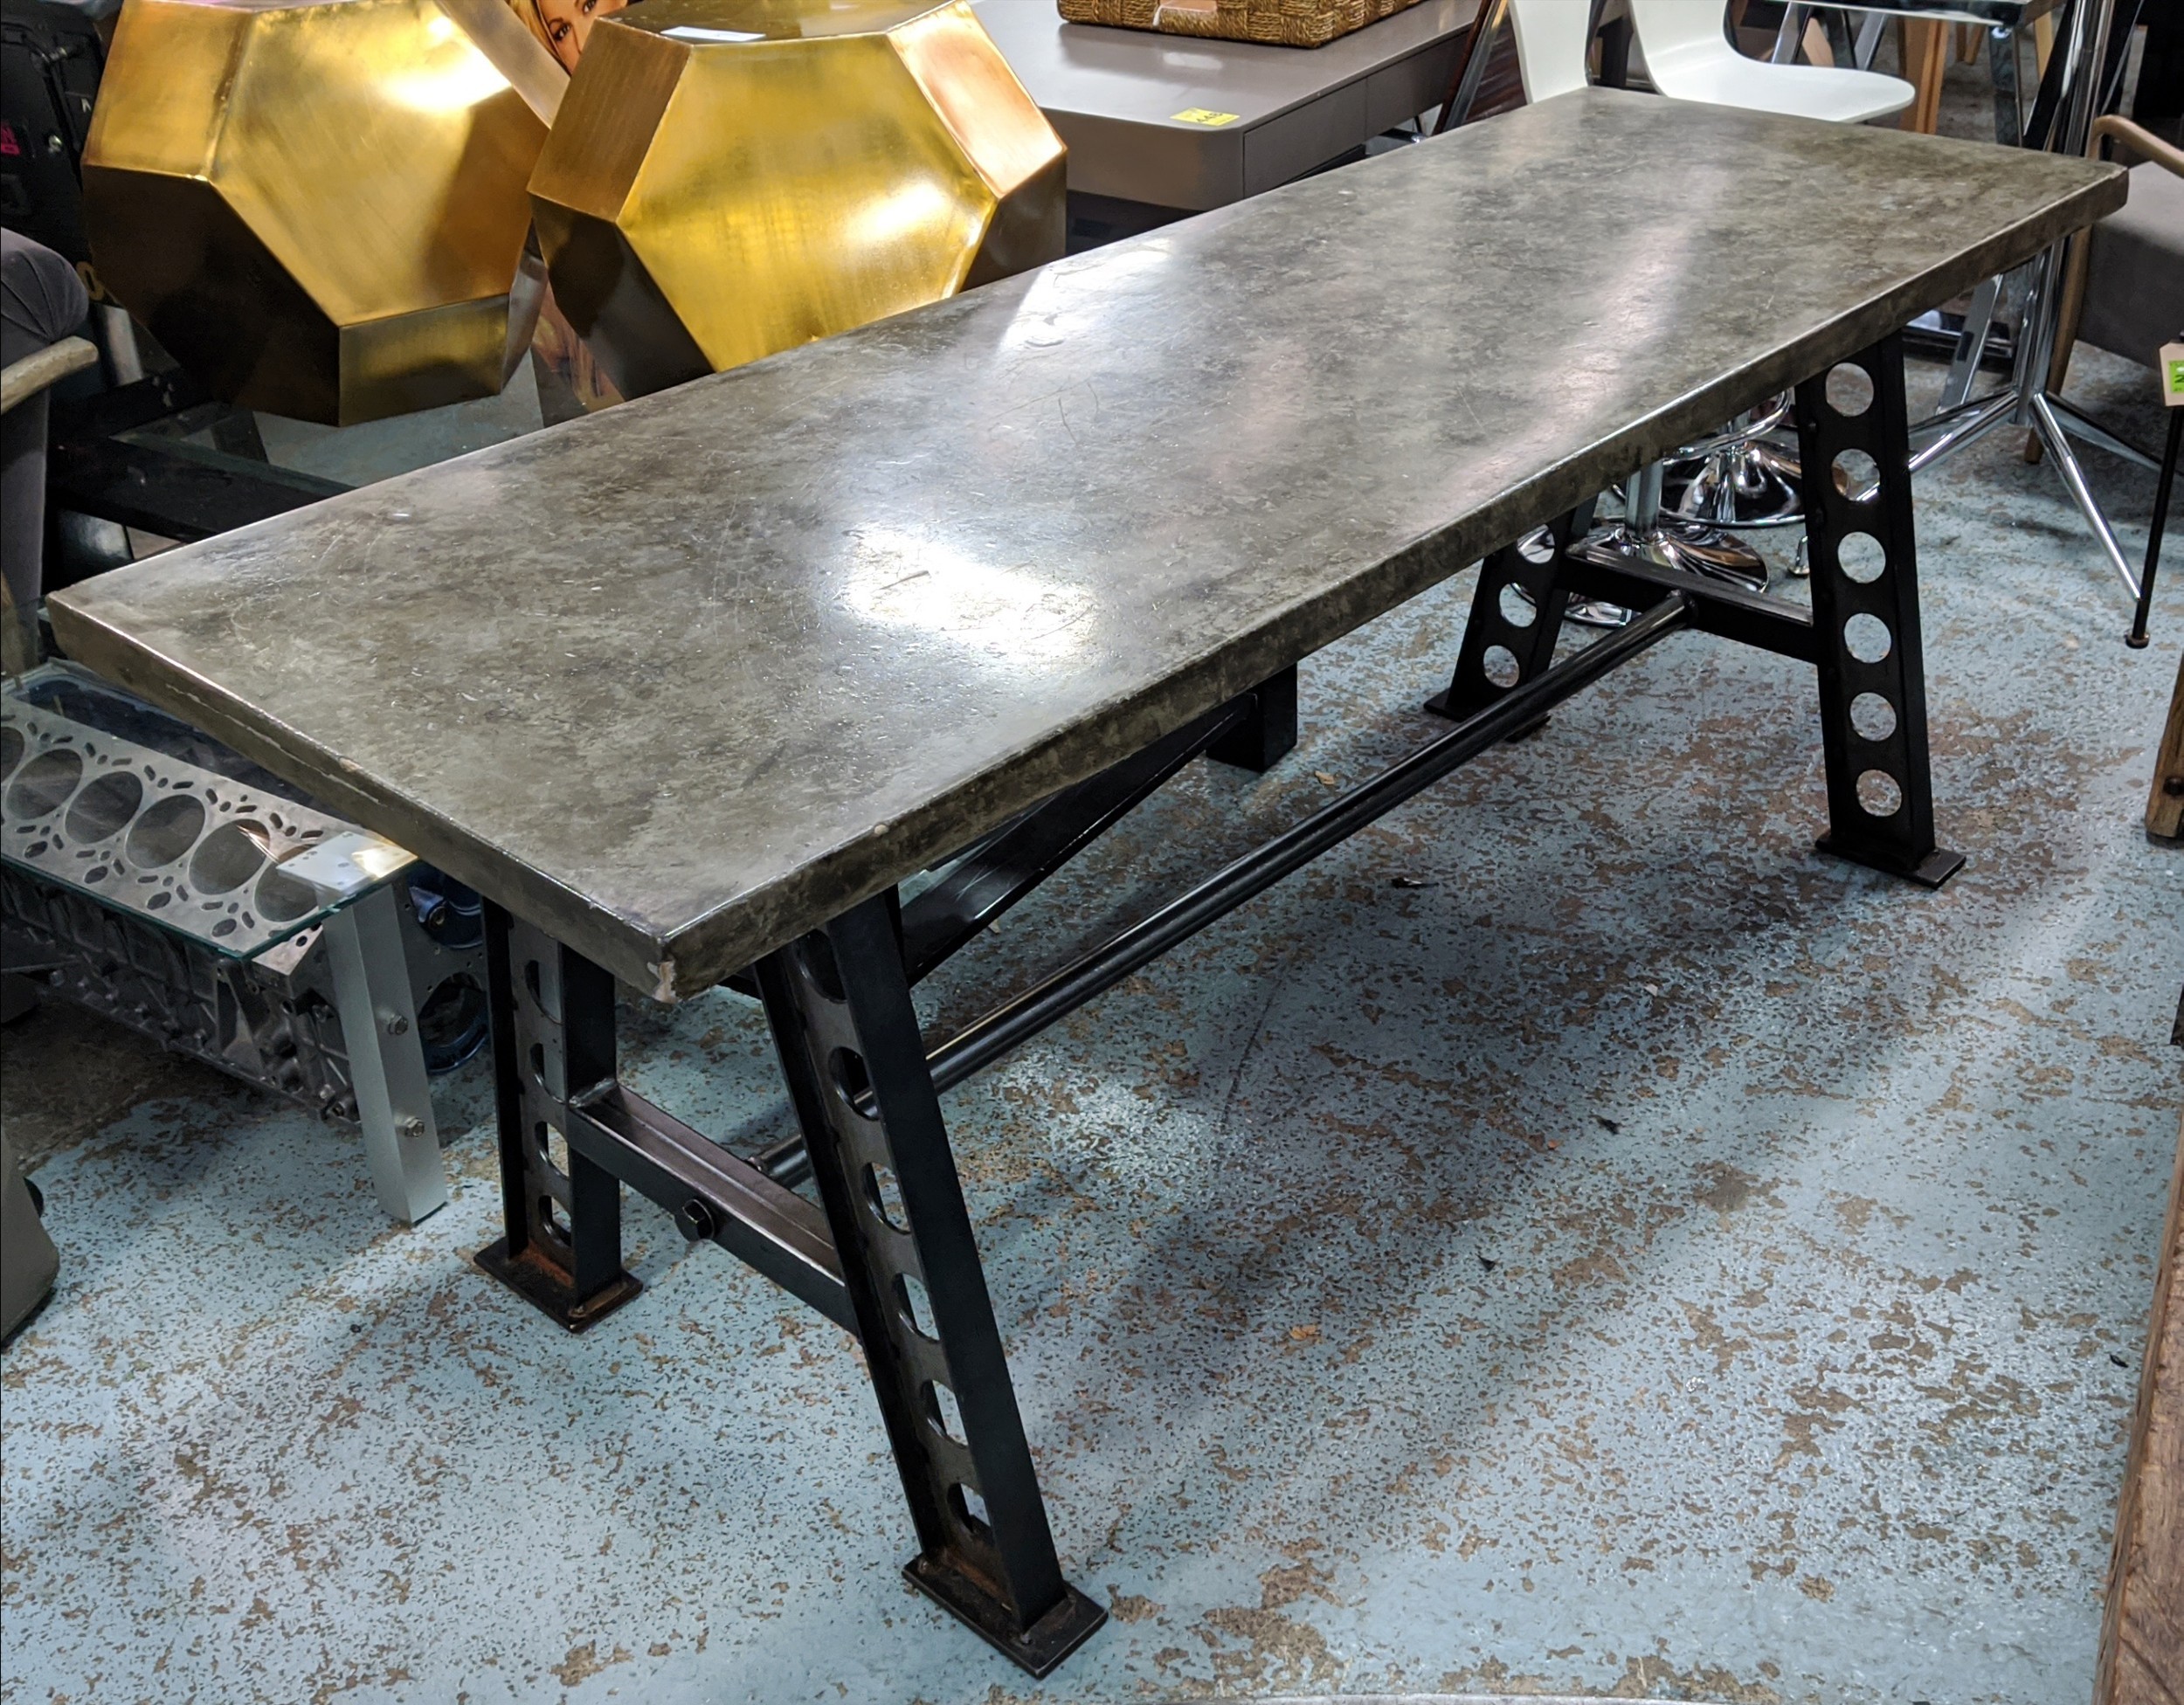 INDUSTRIAL STYLE TABLE, 70cm D x 80cm H x 200cm L, faux metallic top on cast metal supports.